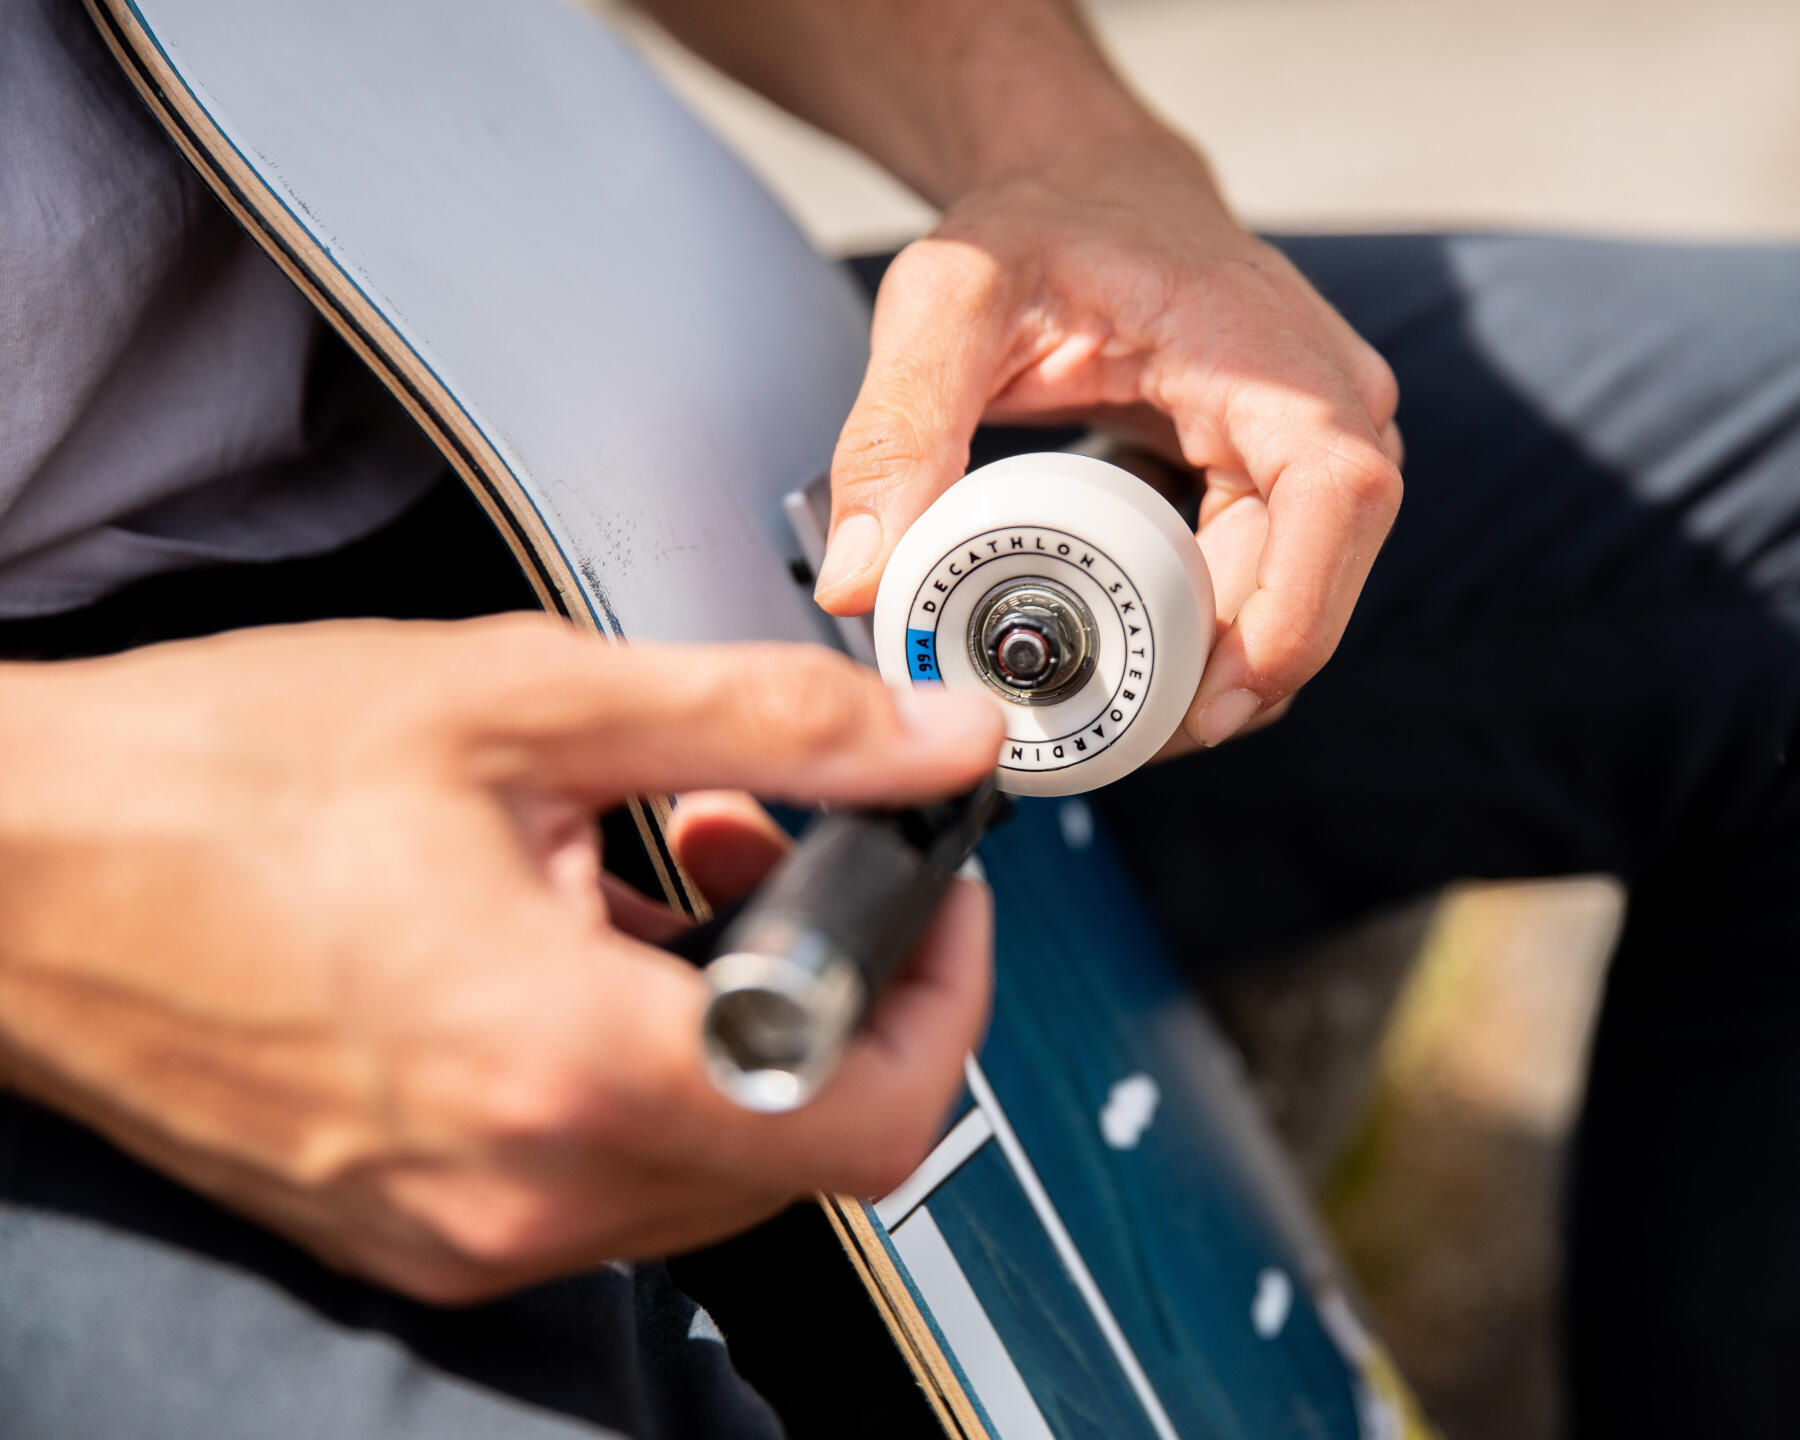 Replacing your skateboard wheels